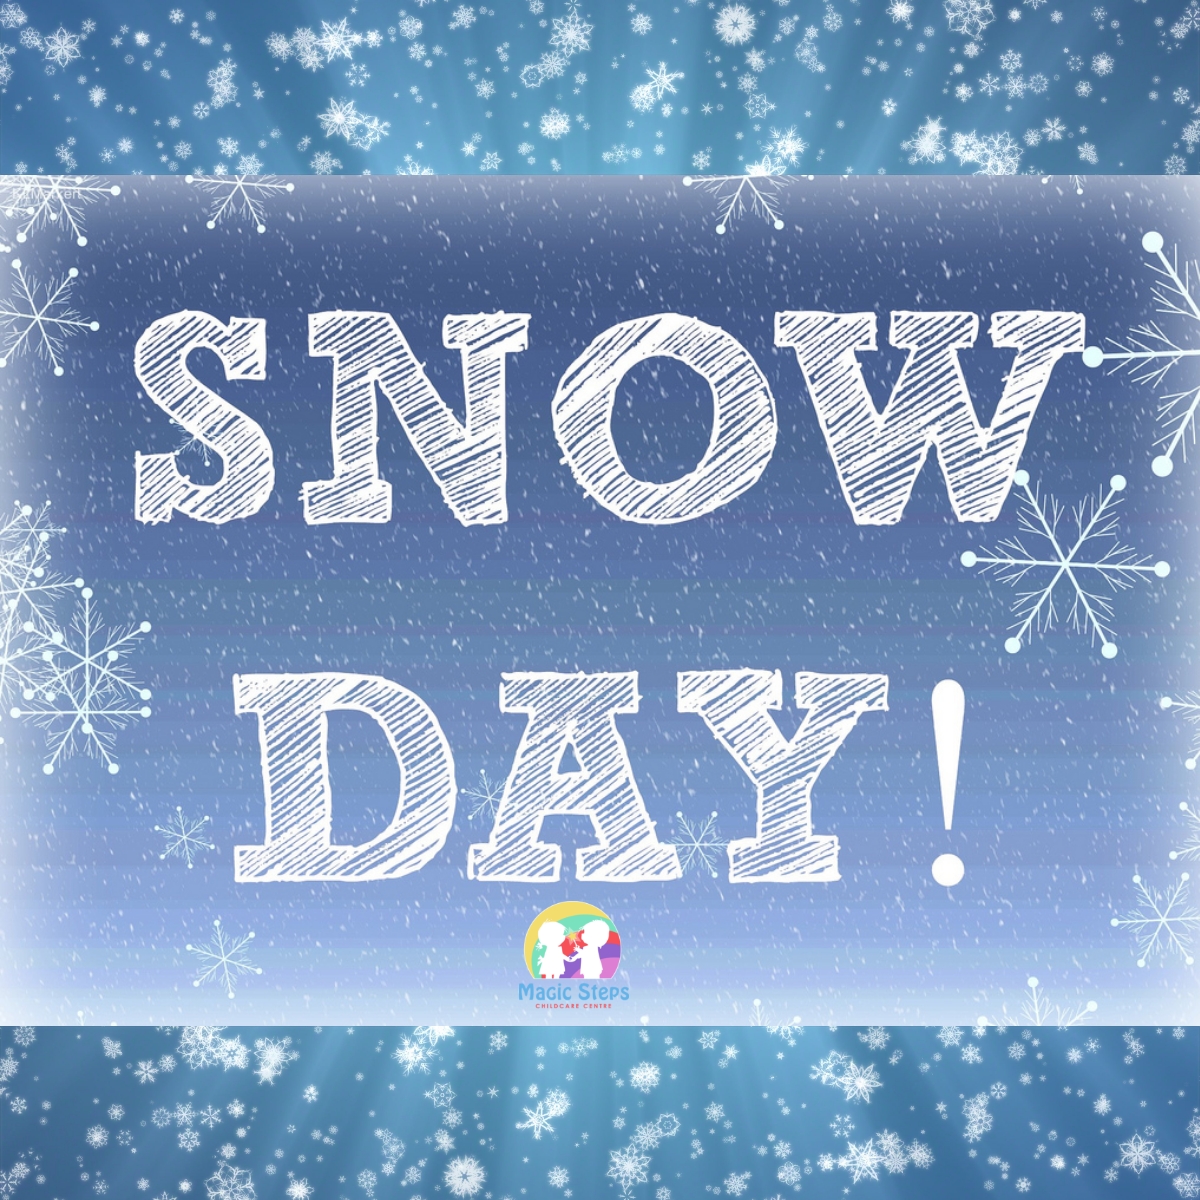 Snow Day at Magic Steps- Wednesday 20th January